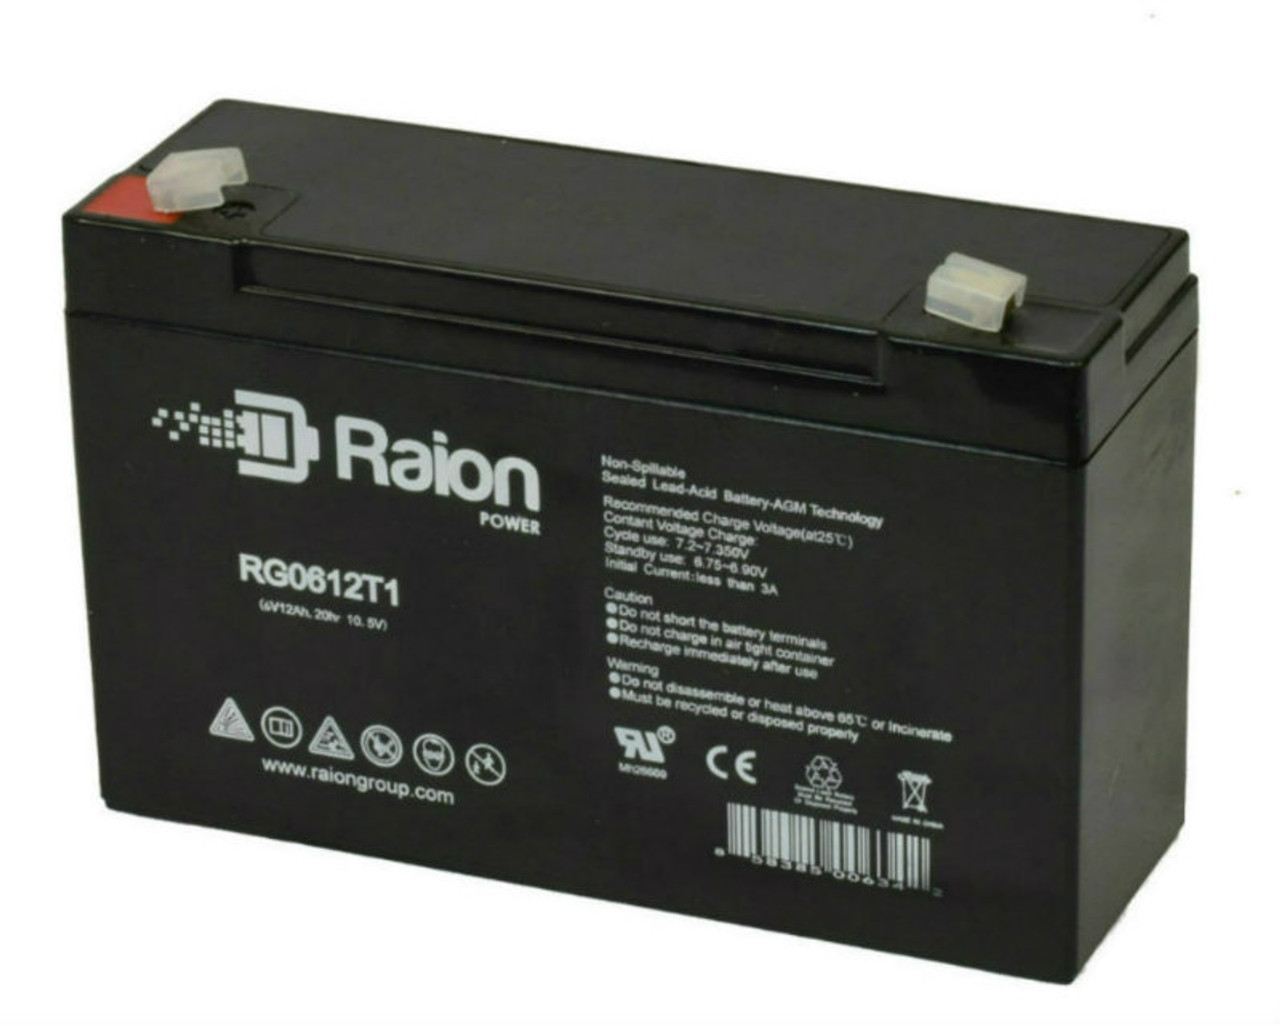 Raion Power RG06120T1 Replacement Battery for Palma PM10-6